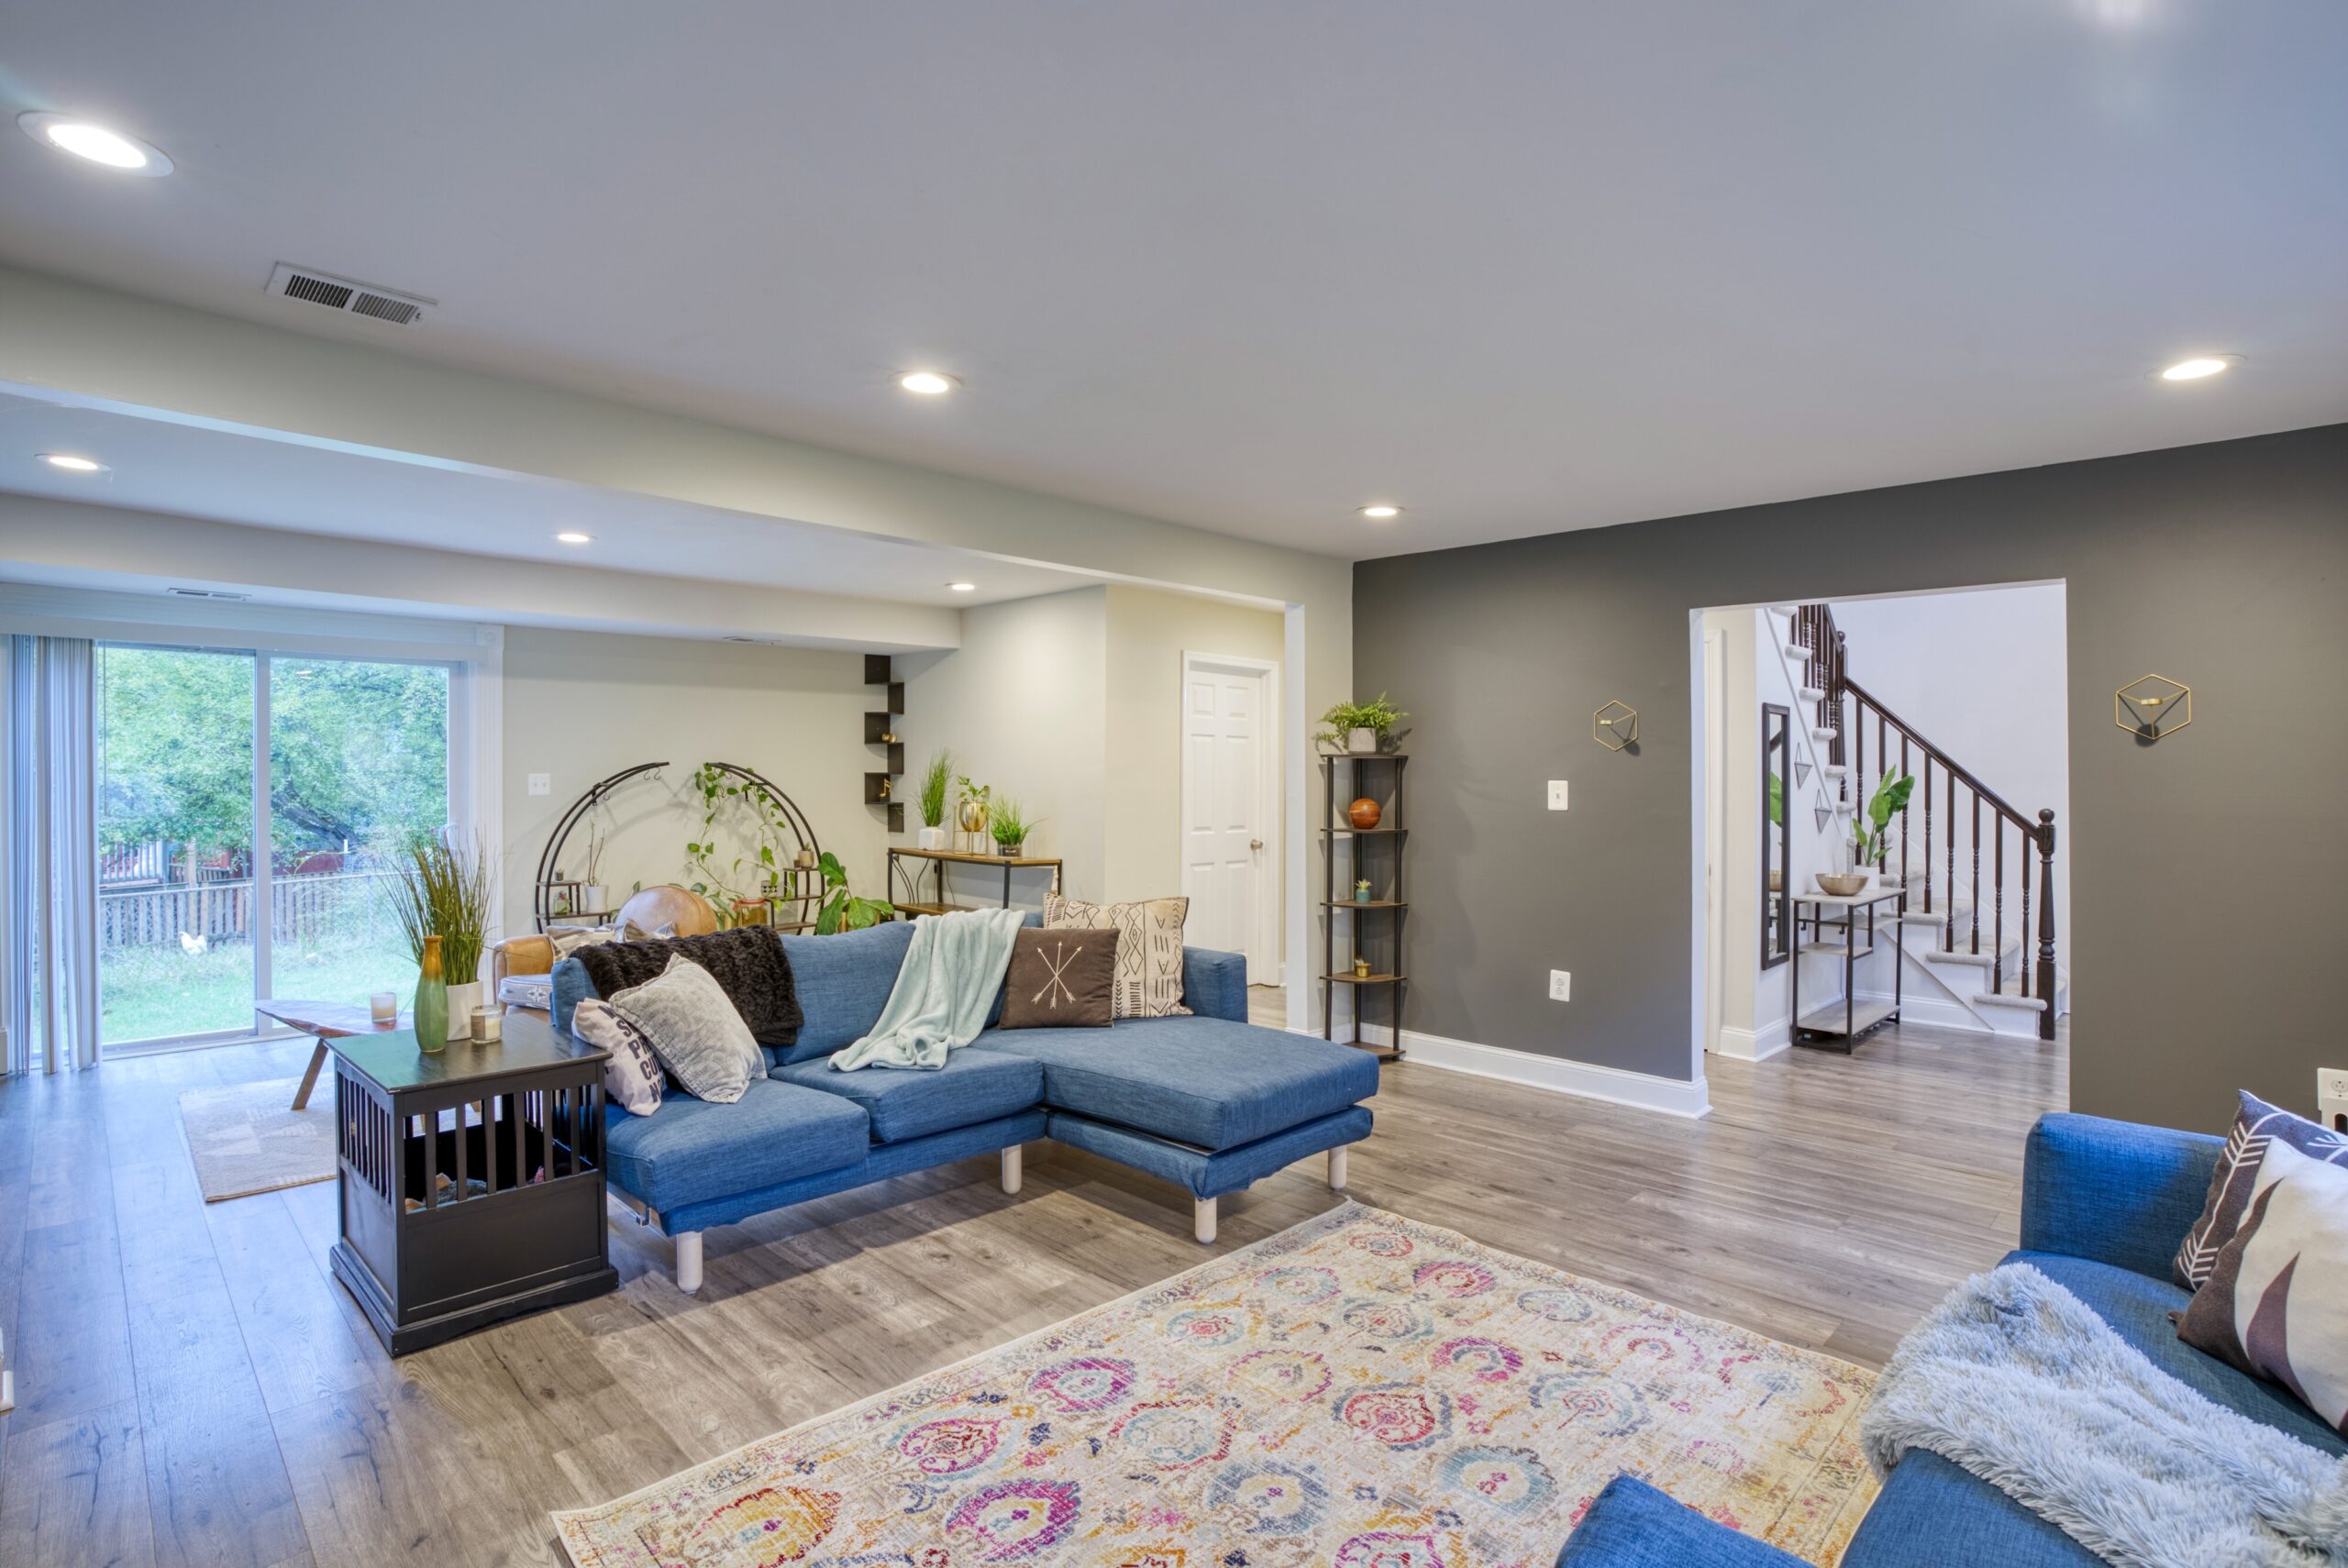 Interior professional photo of 9015 Longbow Rd - showing modern staged living room, hallway and staircase to second floor in the background.